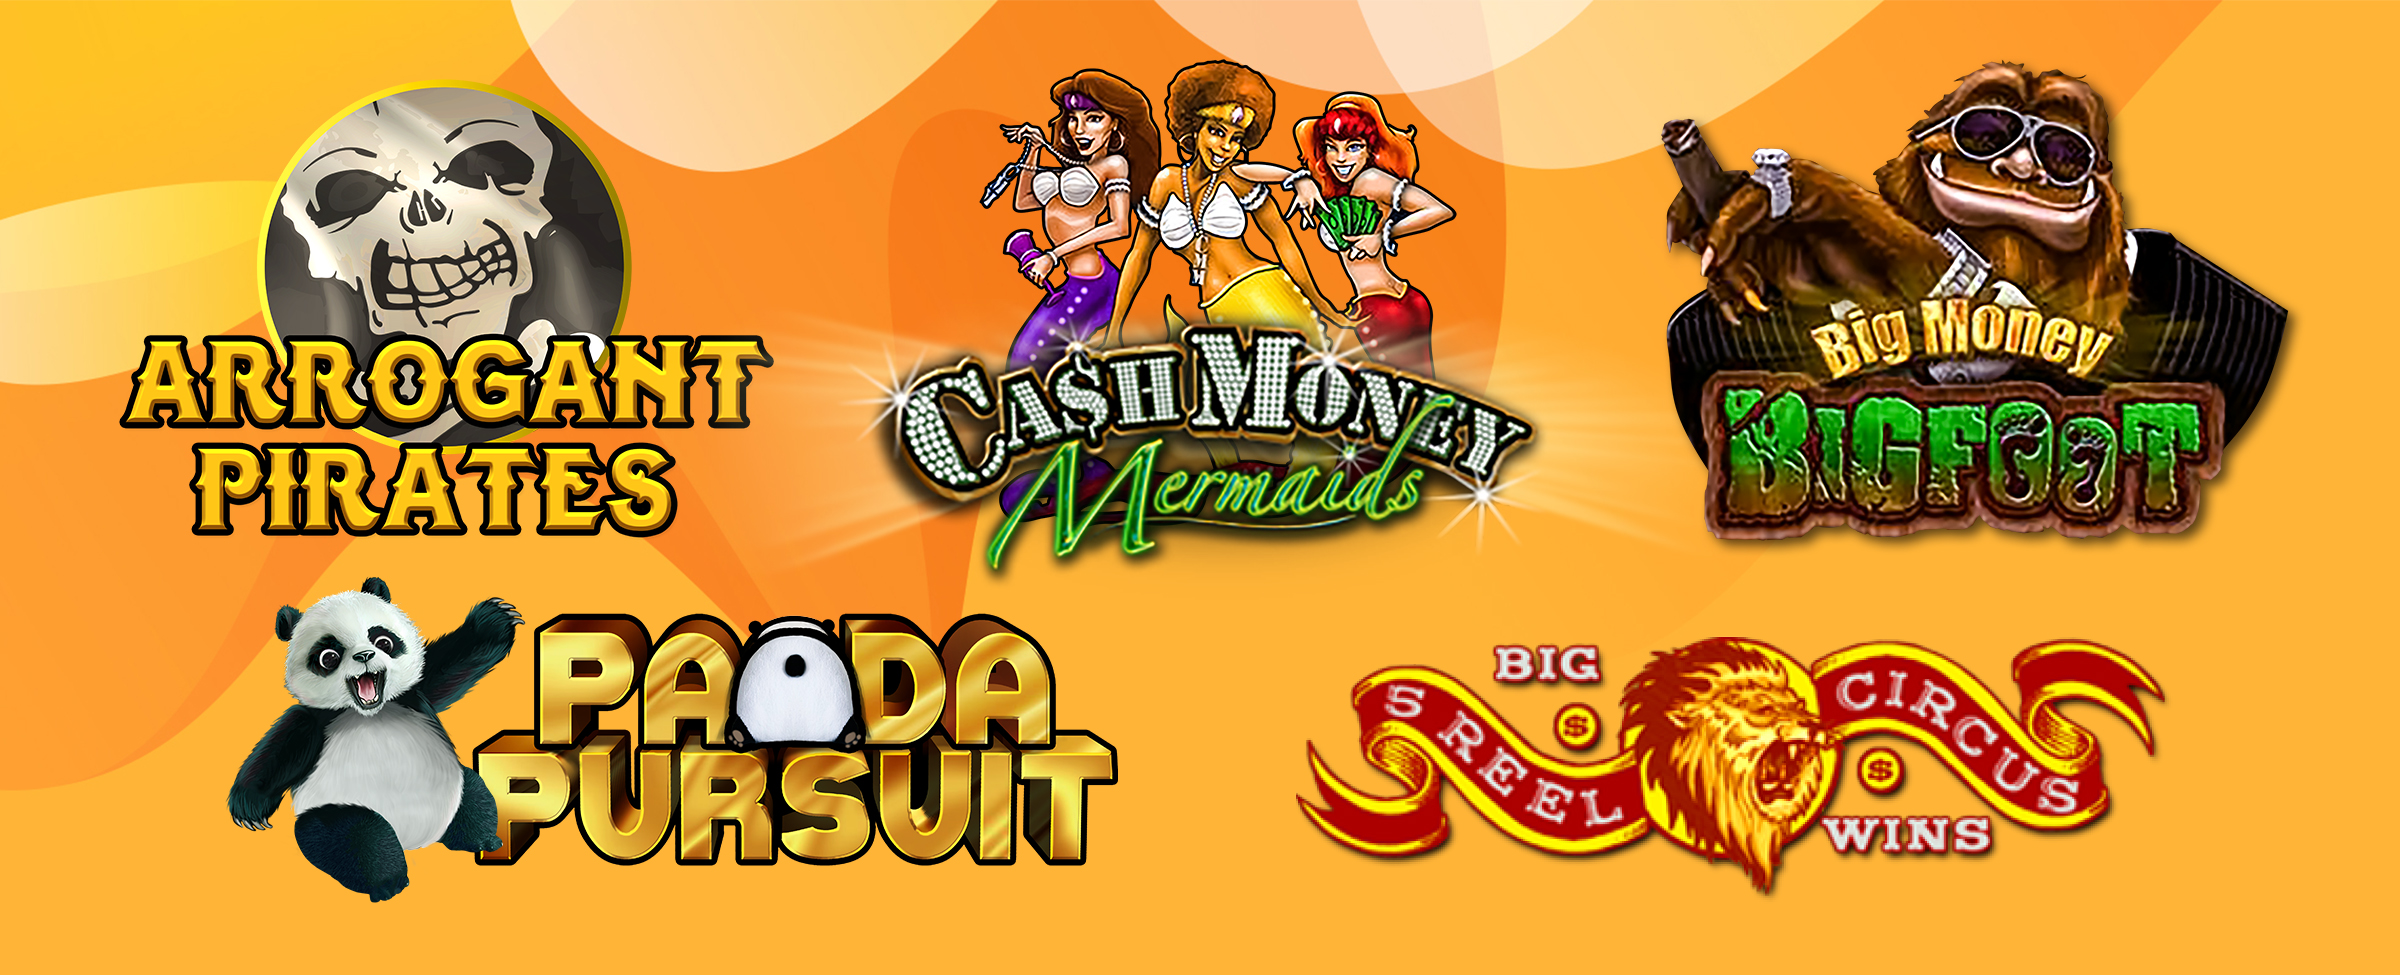 Take in the excitement on offer with Cash Mermaids, Panda Pursuit, Arrogant Pirates and more.